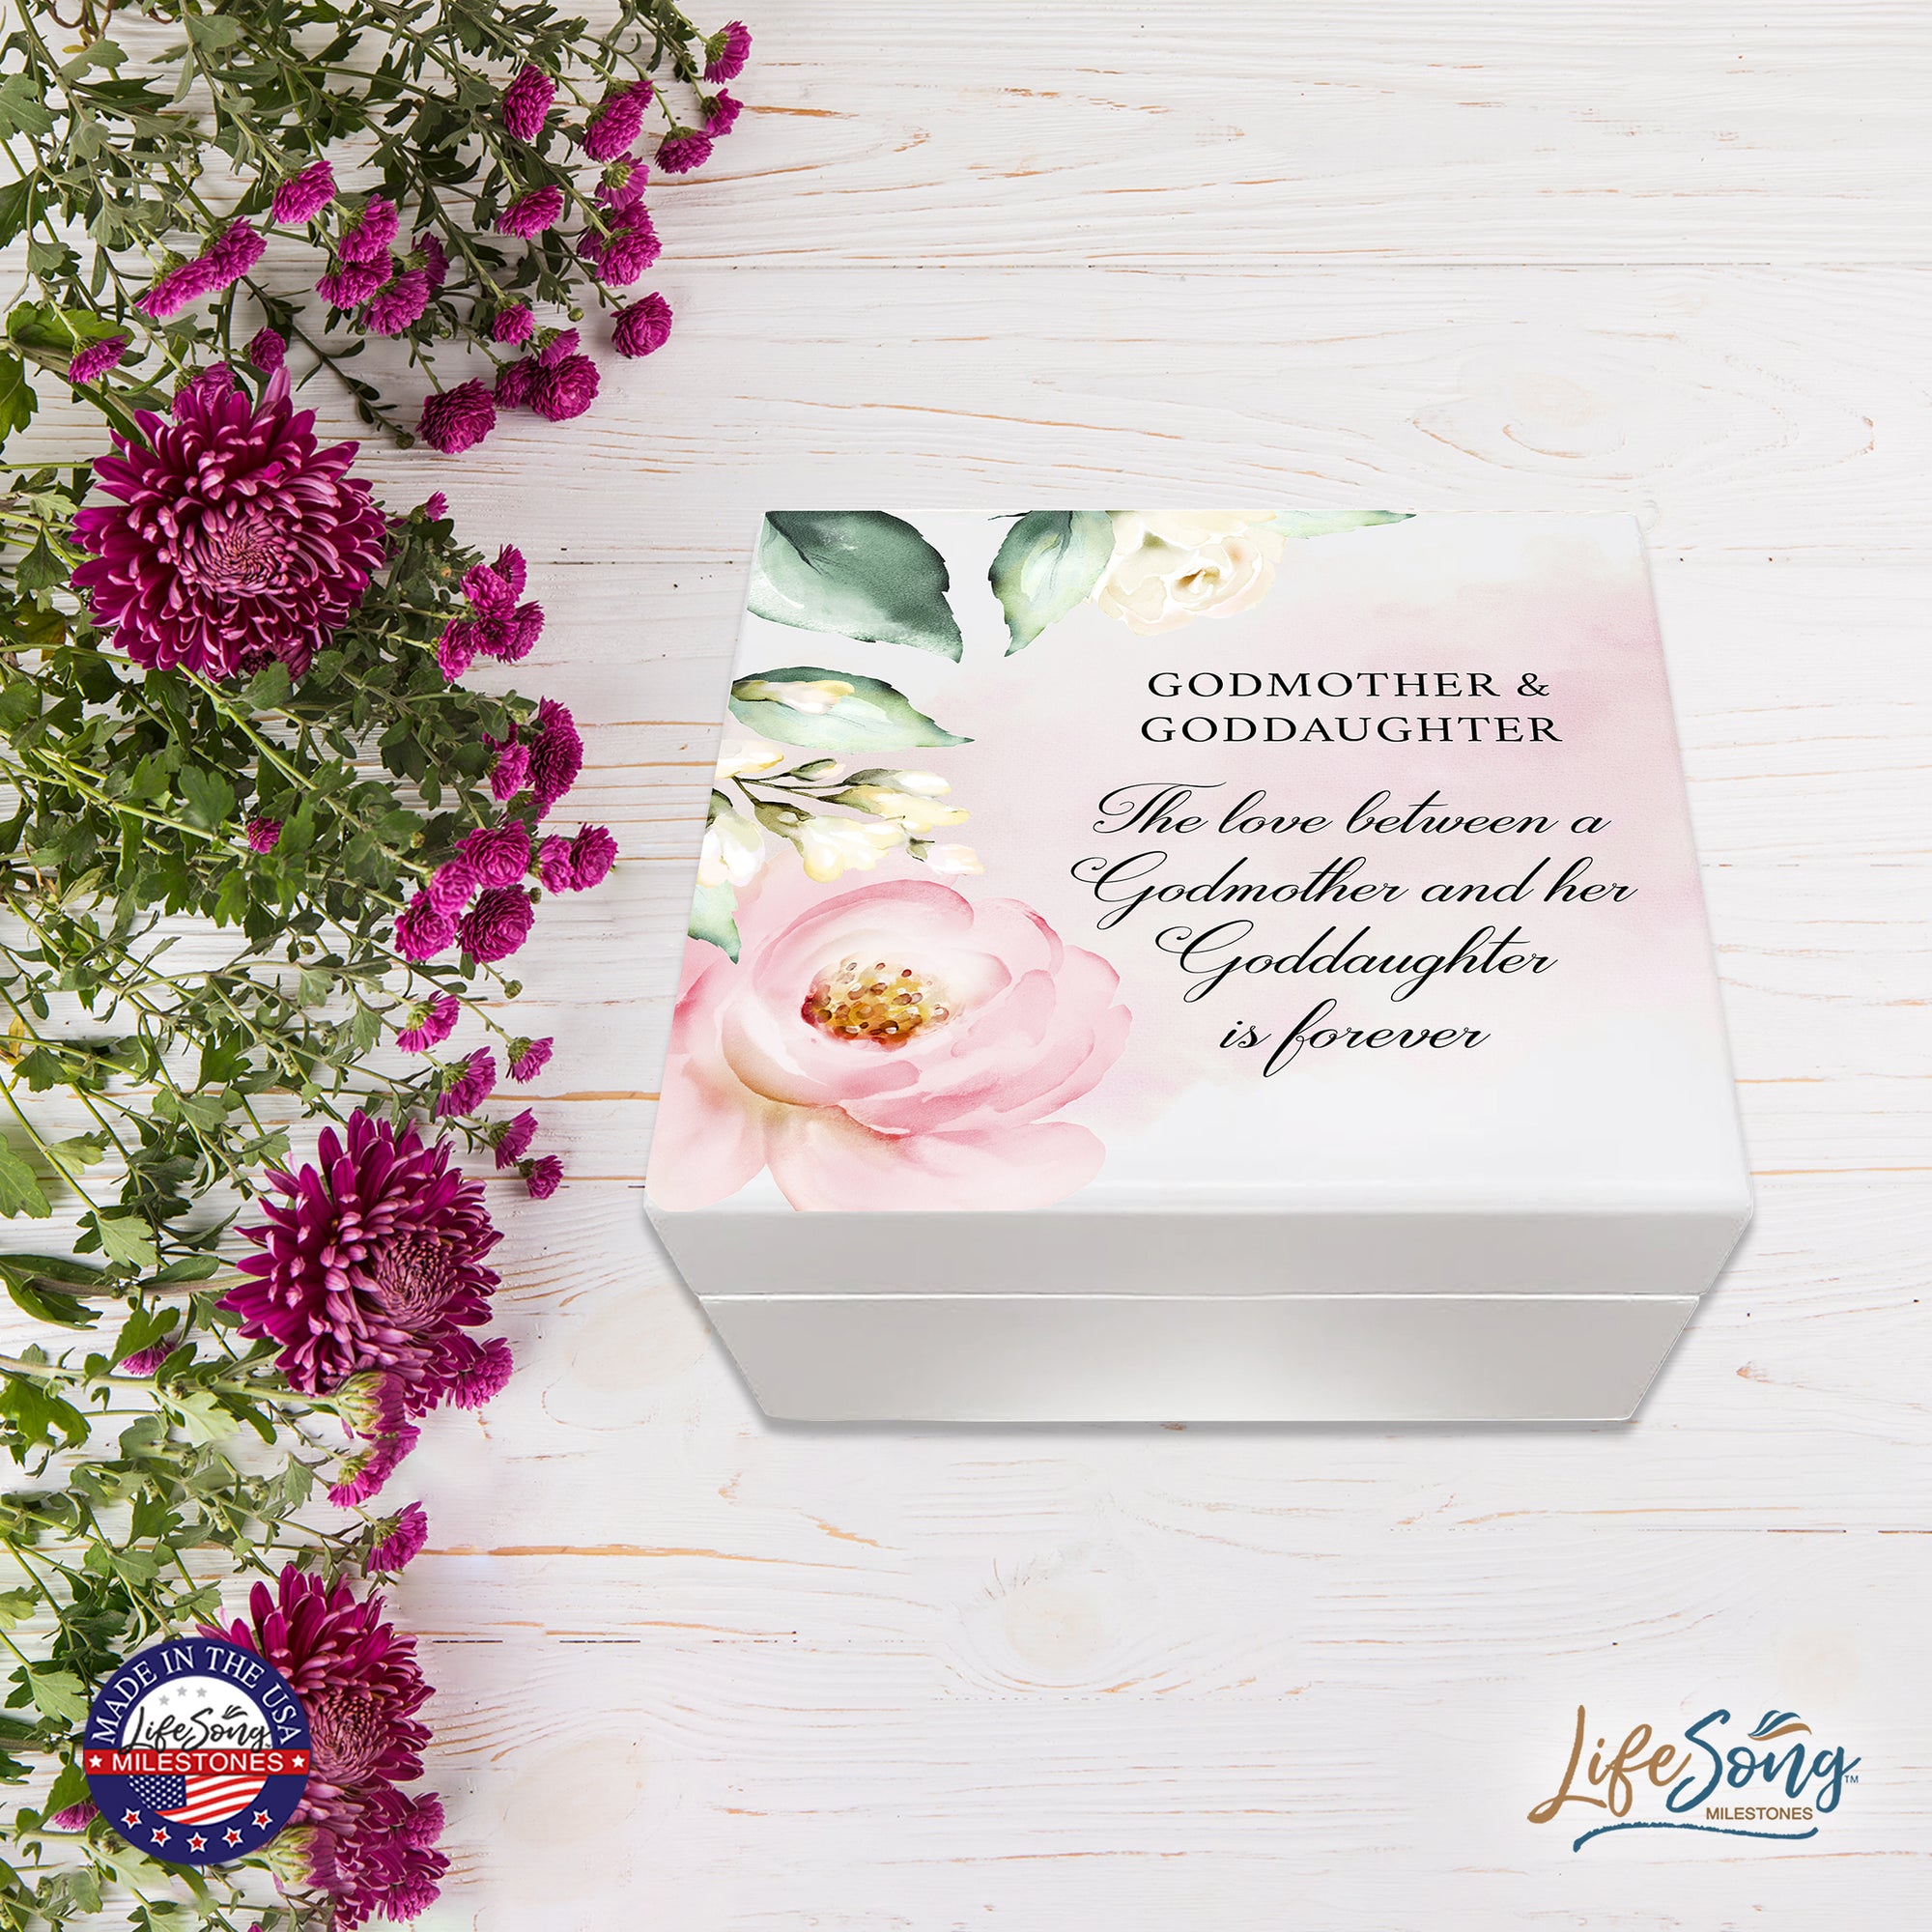 LifeSong Milestones Modern Inspirational White Jewelry Keepsake Box for GodMother 6x5.5 - The Love Between. Housewarming keepsake gifts for your beloved GodMother. Perfect gift to hold your watches, rings, cufflinks, bracelets, necklaces & special mementos